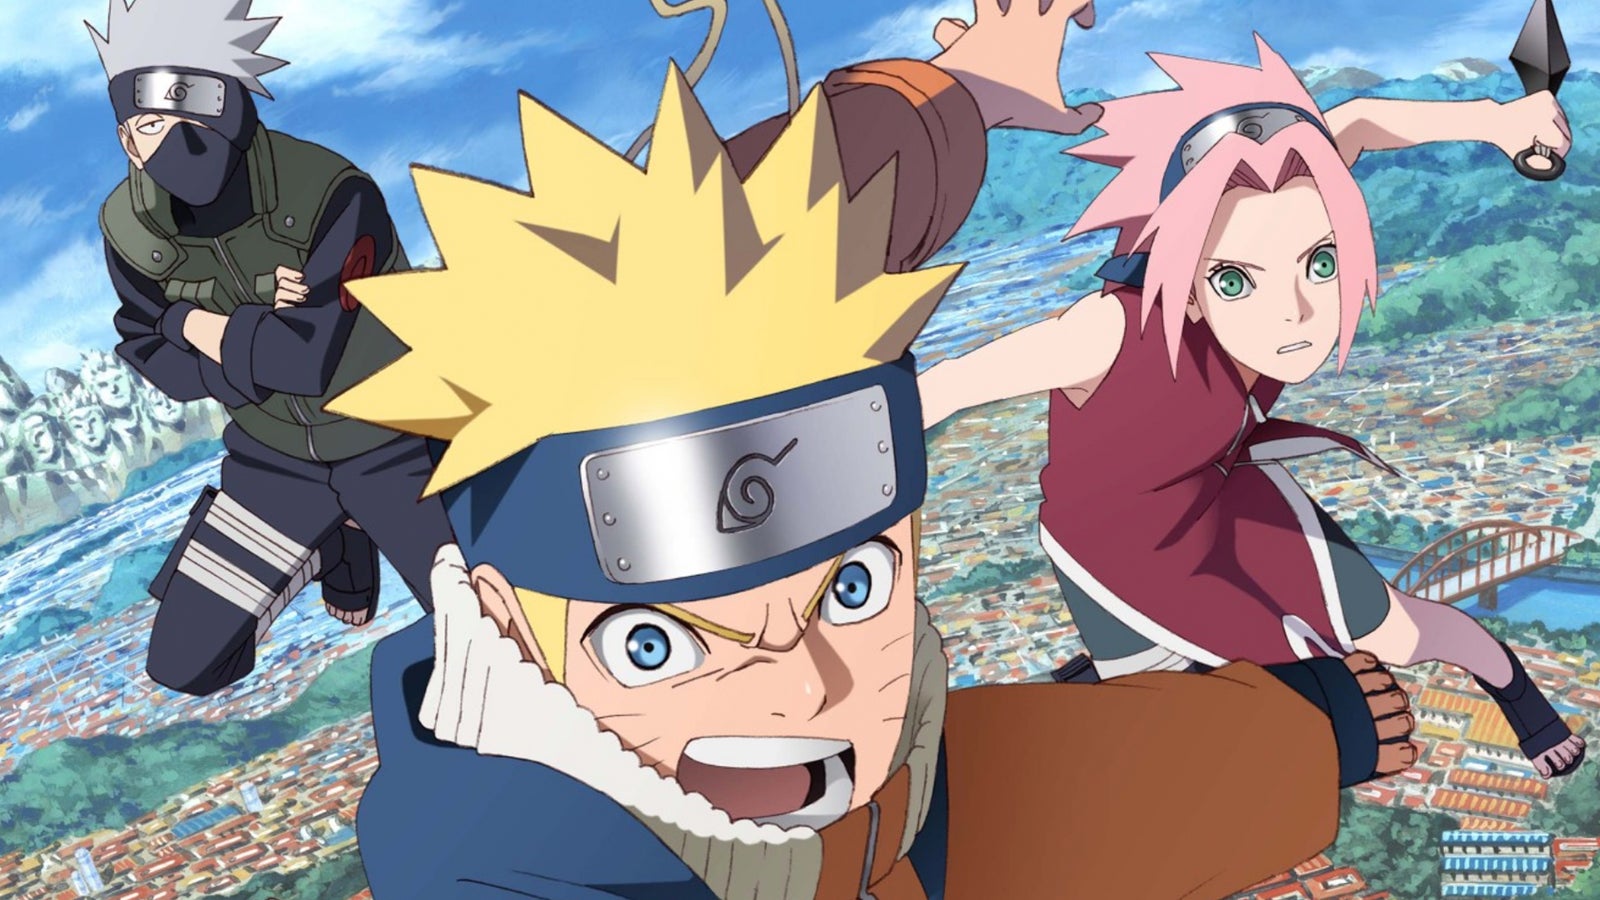 andrew berg recommends naruto shippuden anime haven pic